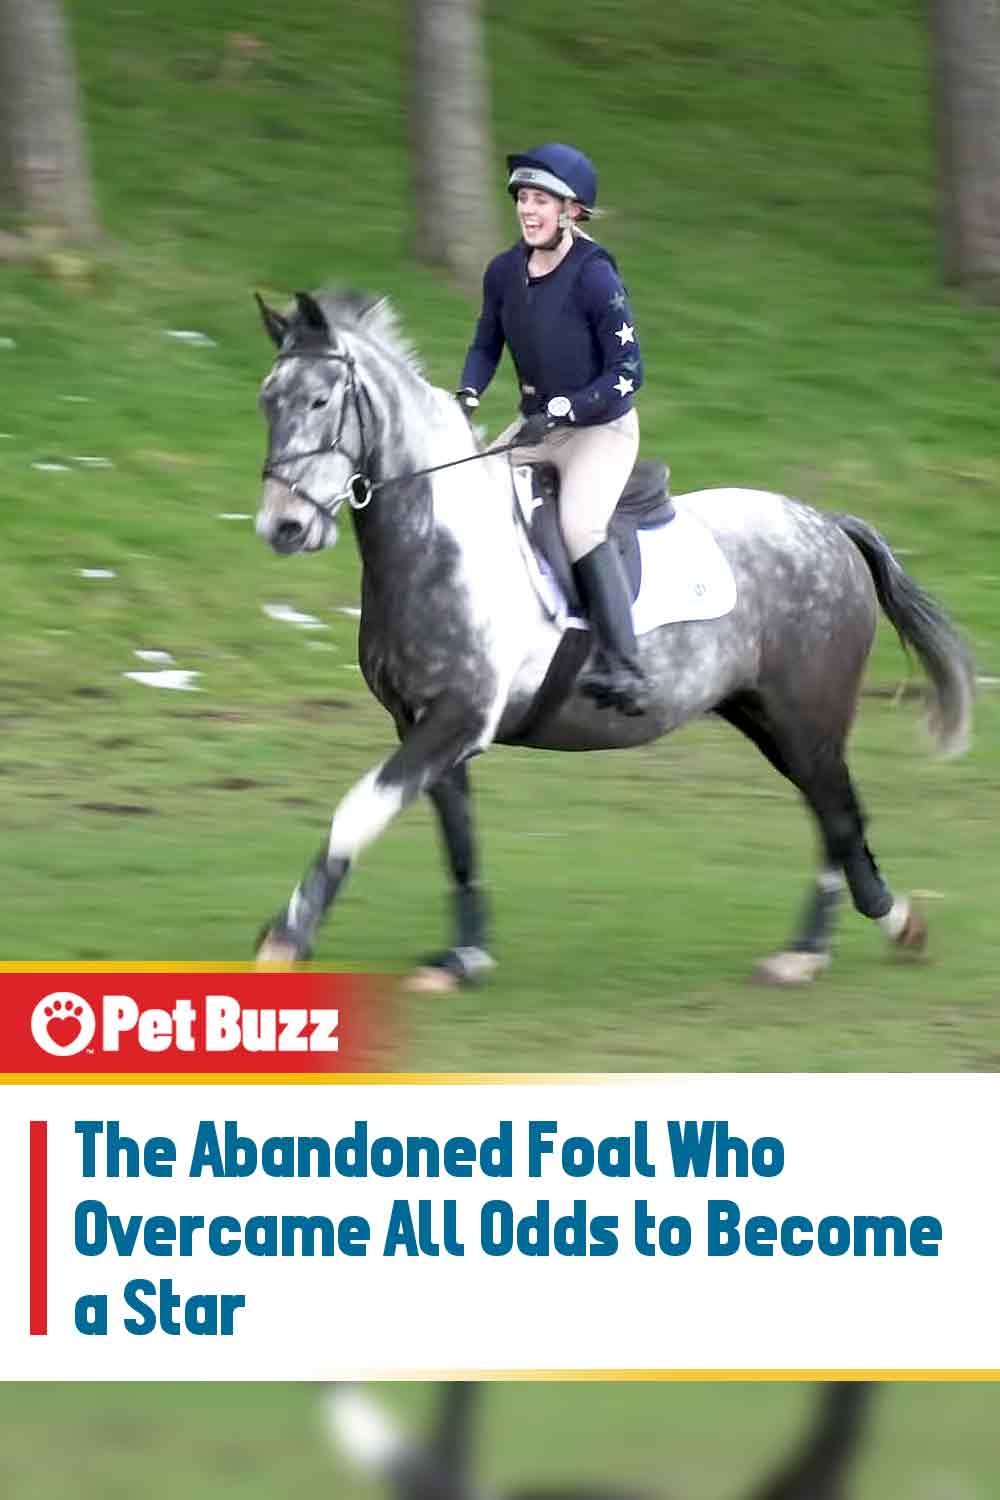 The Abandoned Foal Who Overcame All Odds to Become a Star